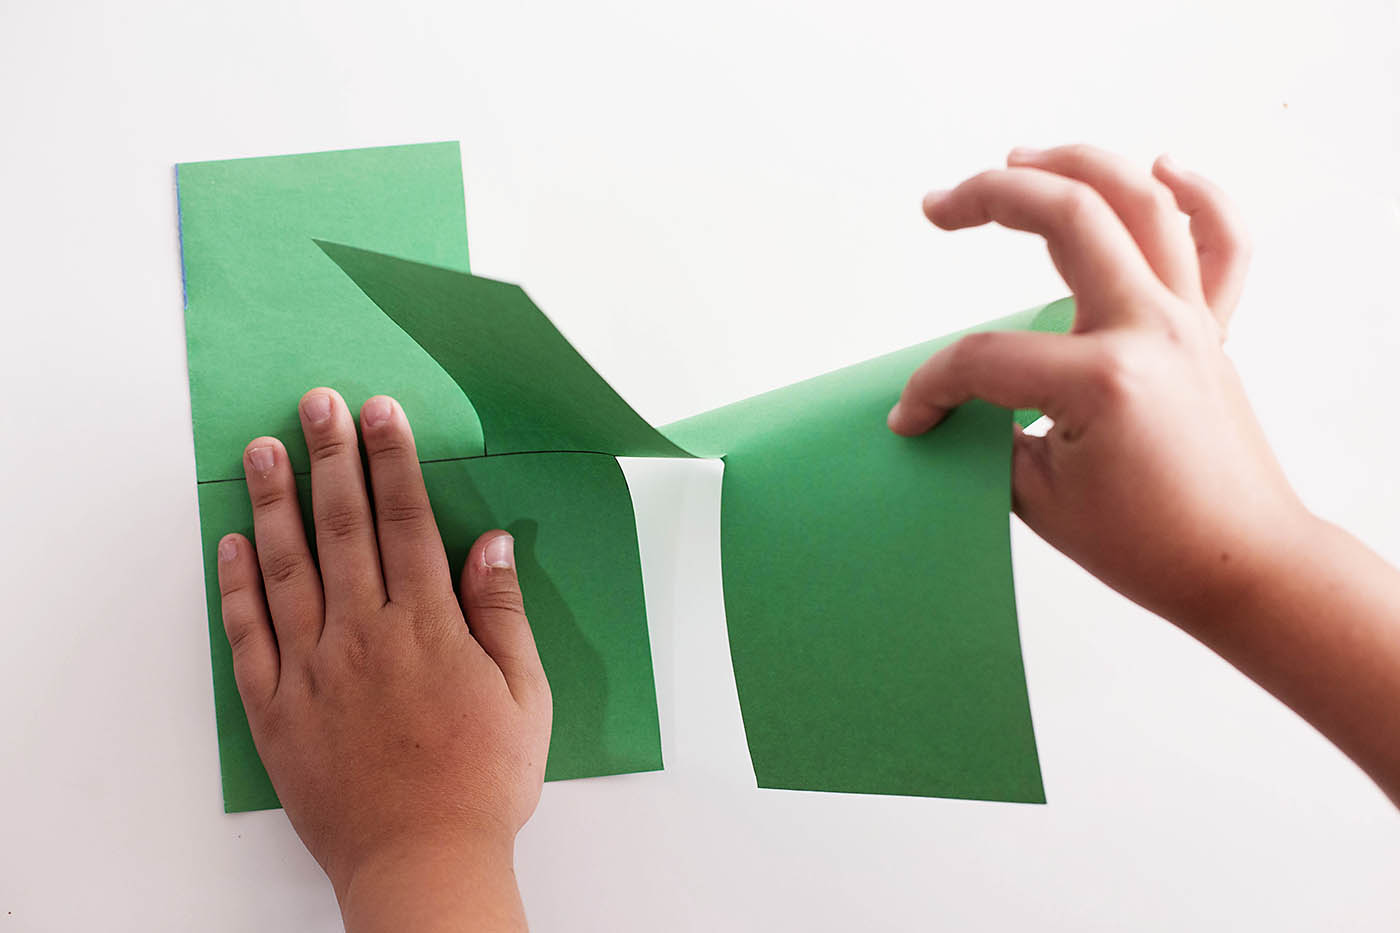 Easy paper illusion, fun "trick" for the kids to impress their friends!